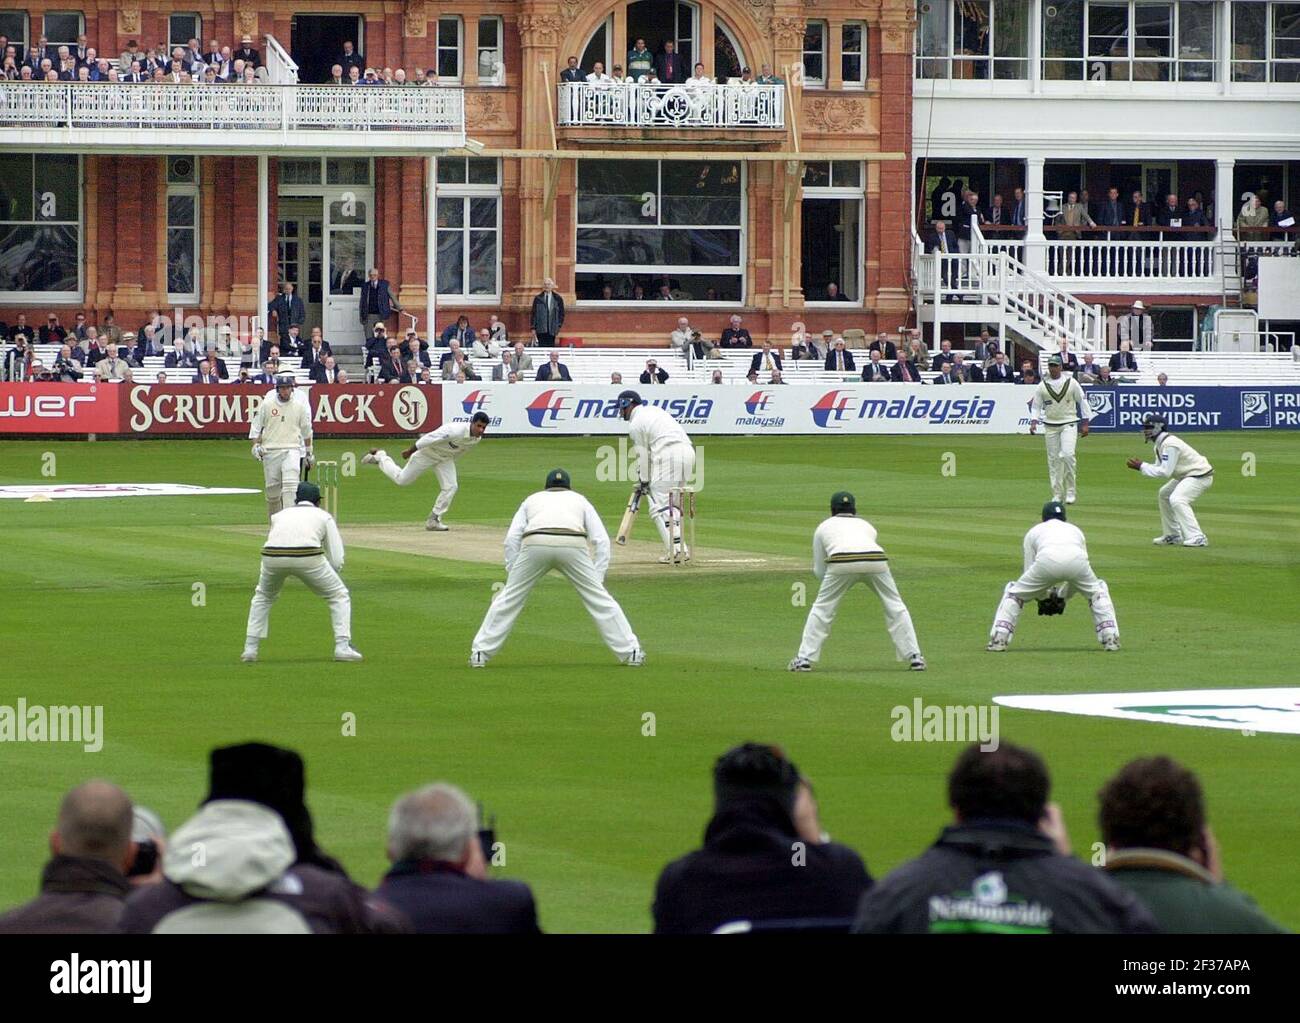 WAQAR YOUNIS TO TRESCOTHICK DURING THE 1st TEST MATCH  AT LORDS ENGLAND V PAKISTAN Stock Photo